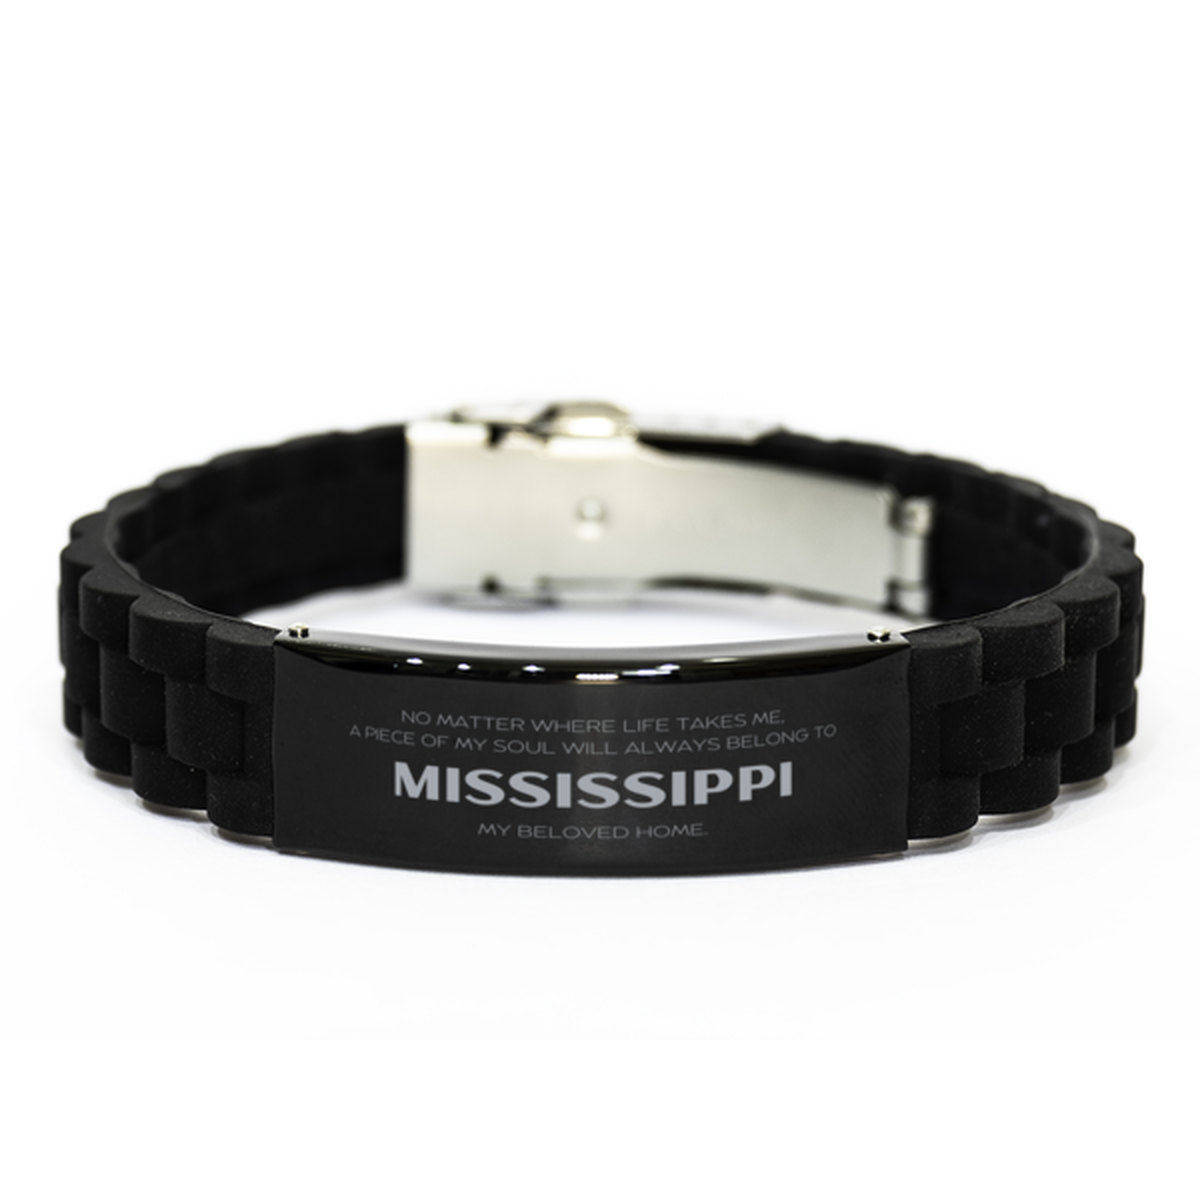 Love Mississippi State Gifts, My soul will always belong to Mississippi, Proud Black Glidelock Clasp Bracelet, Birthday Unique Gifts For Mississippi Men, Women, Friends